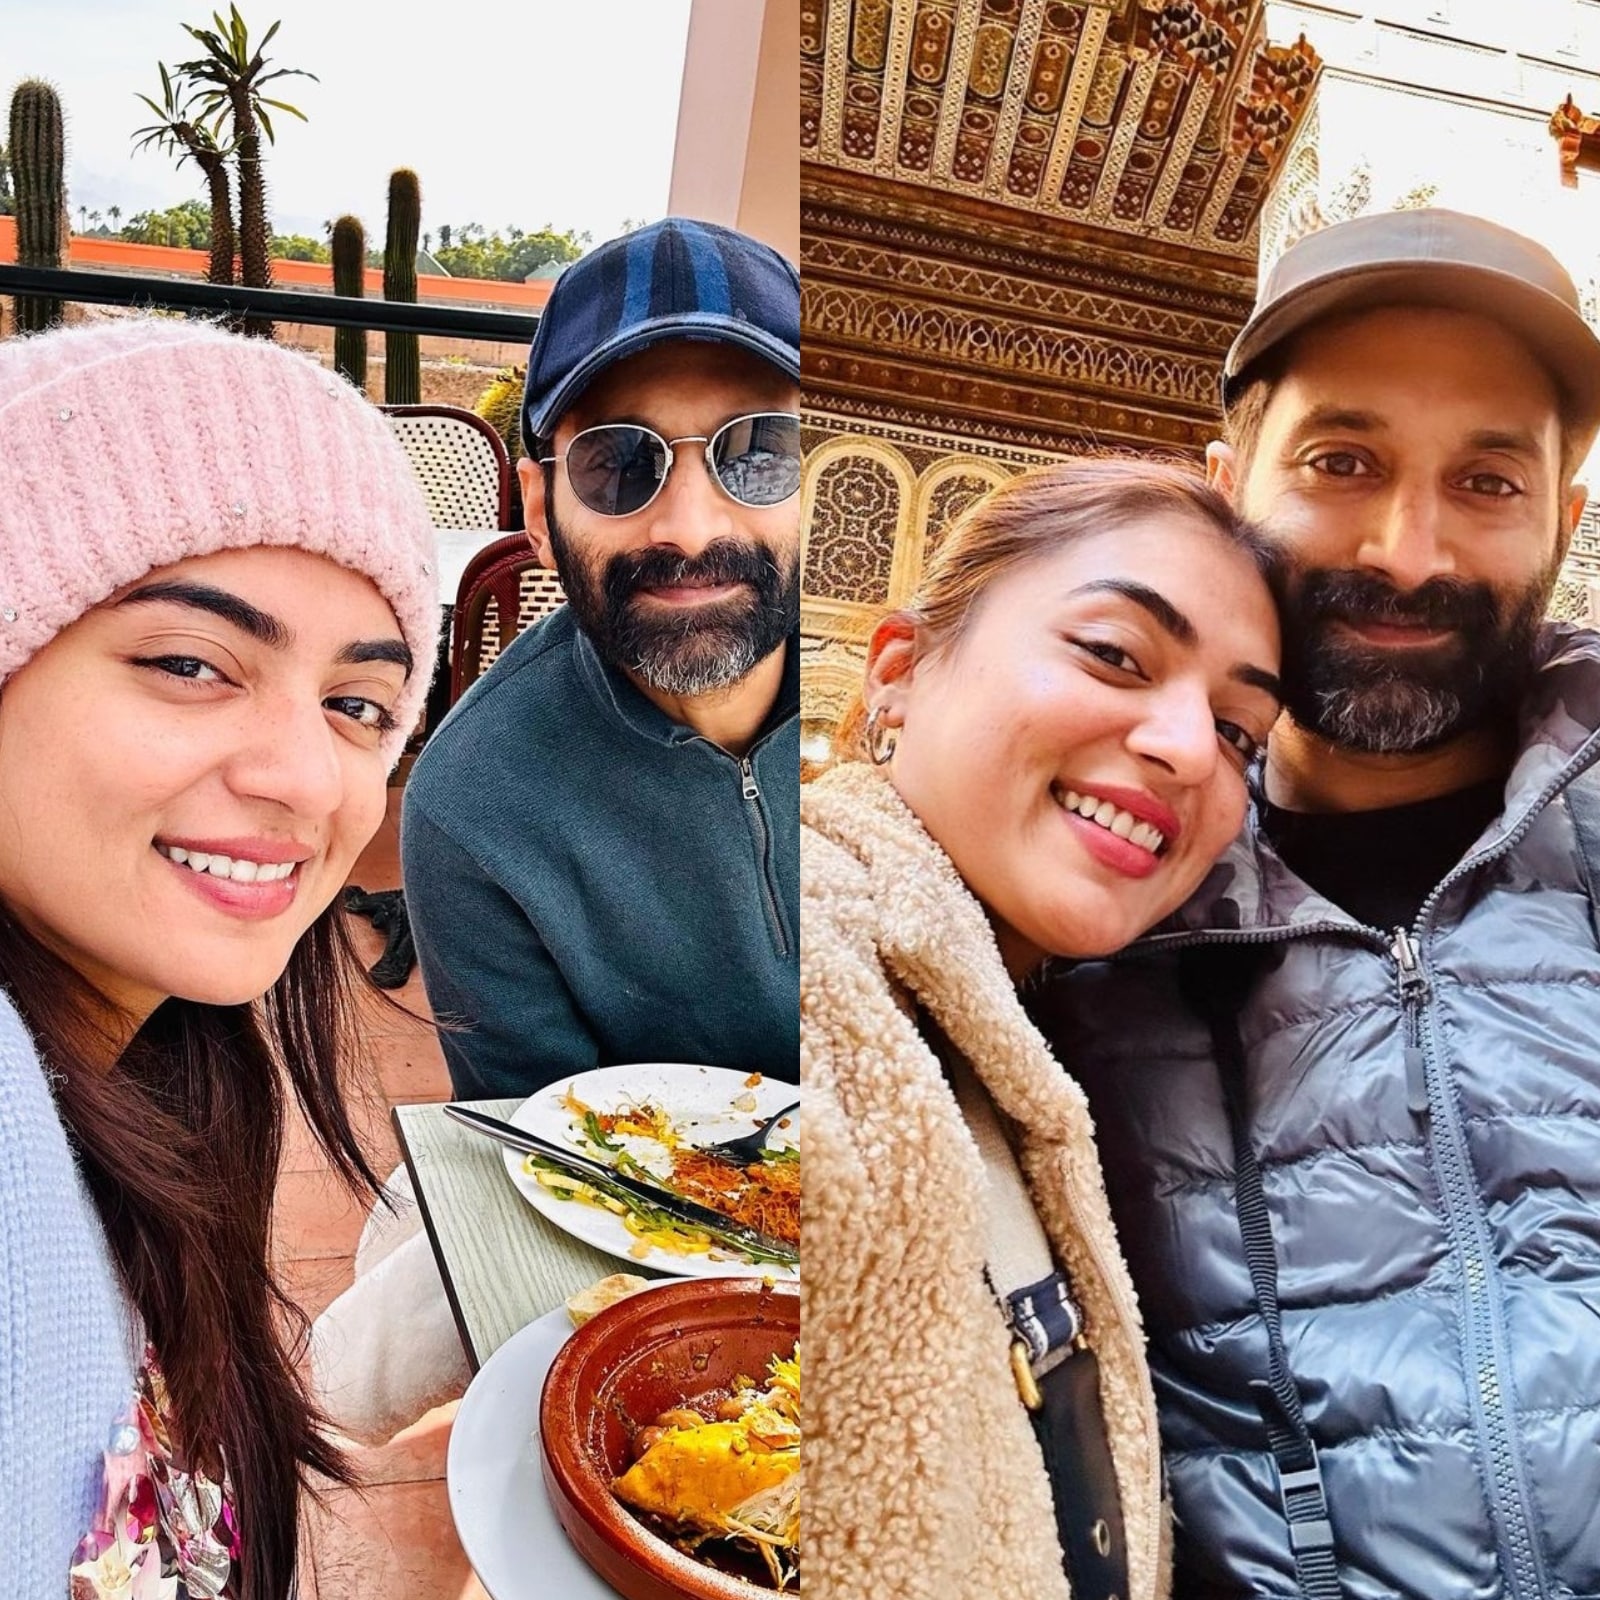 Fahadh Fassil And Nazriya Nazim Pose For Cute Selfies During Their Morocco  Vacation - News18